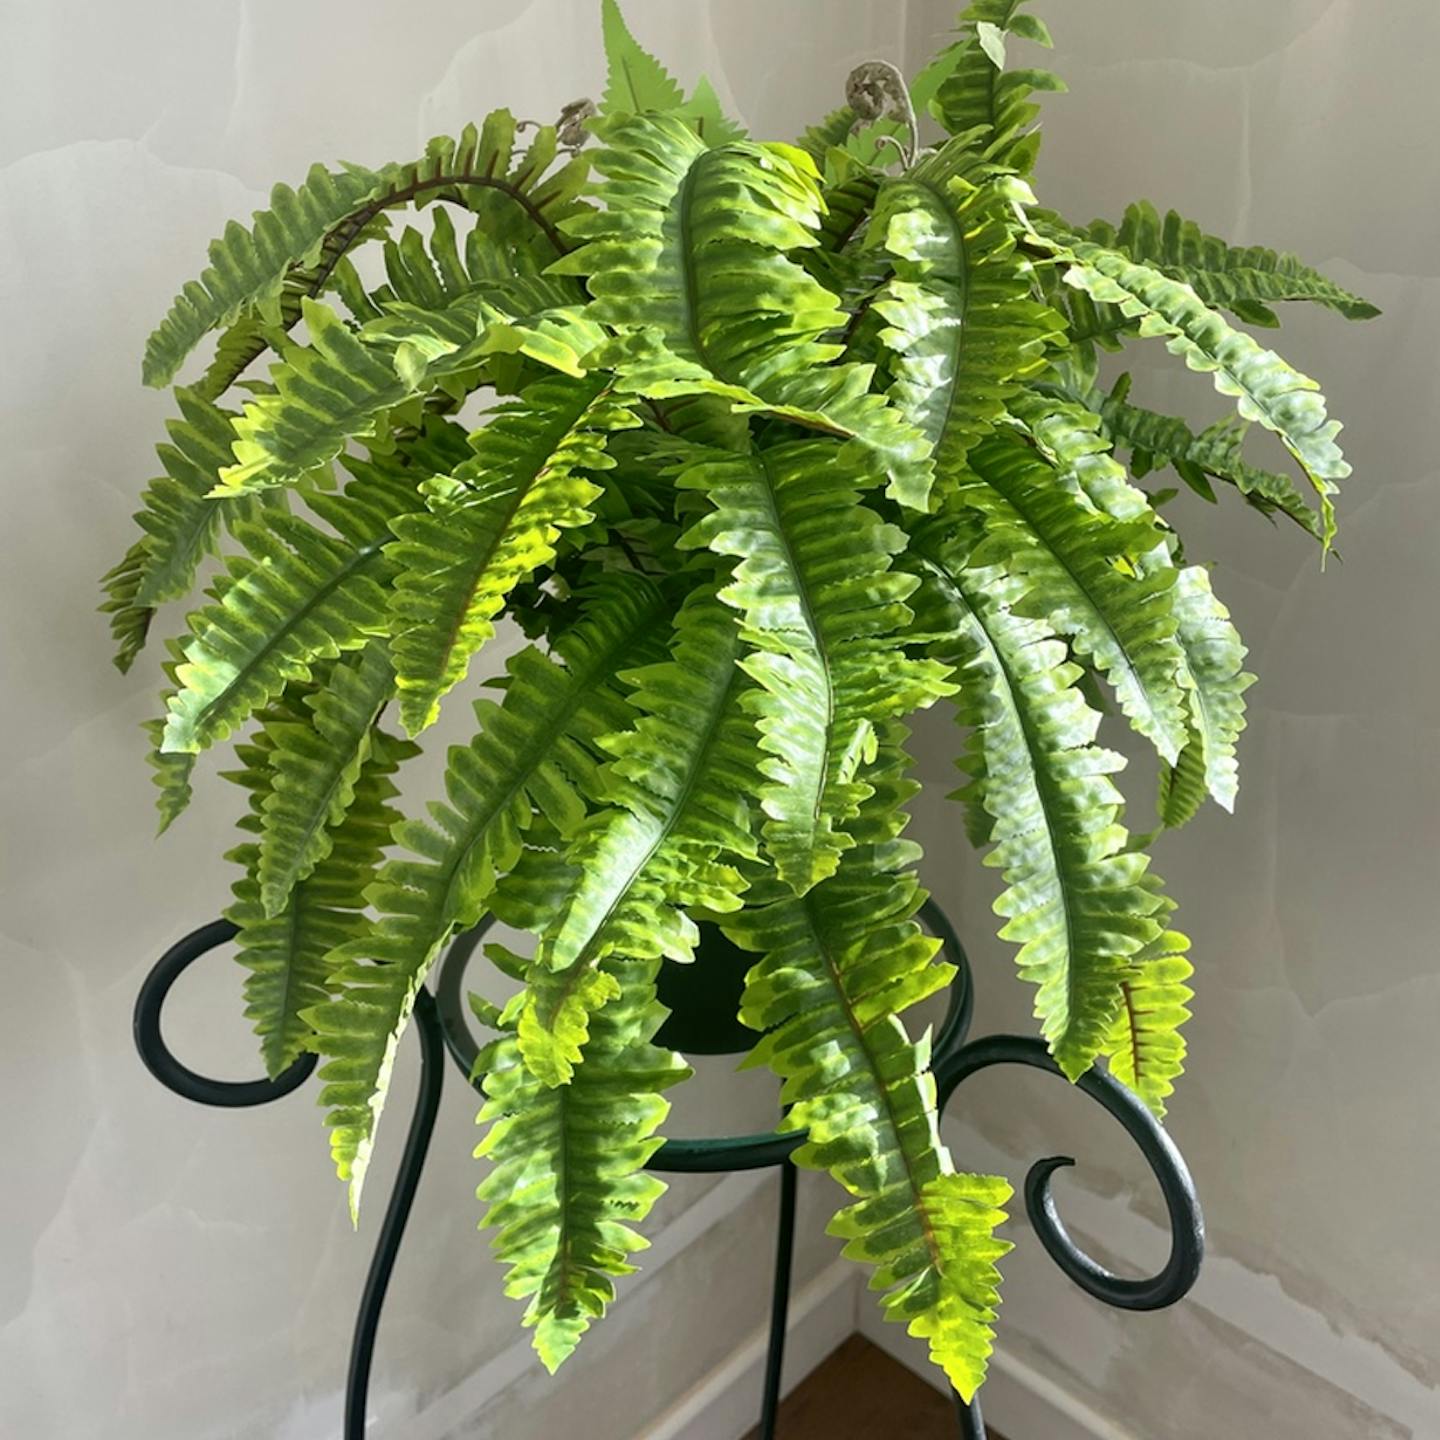 Large artificial Boston fern on plant stand